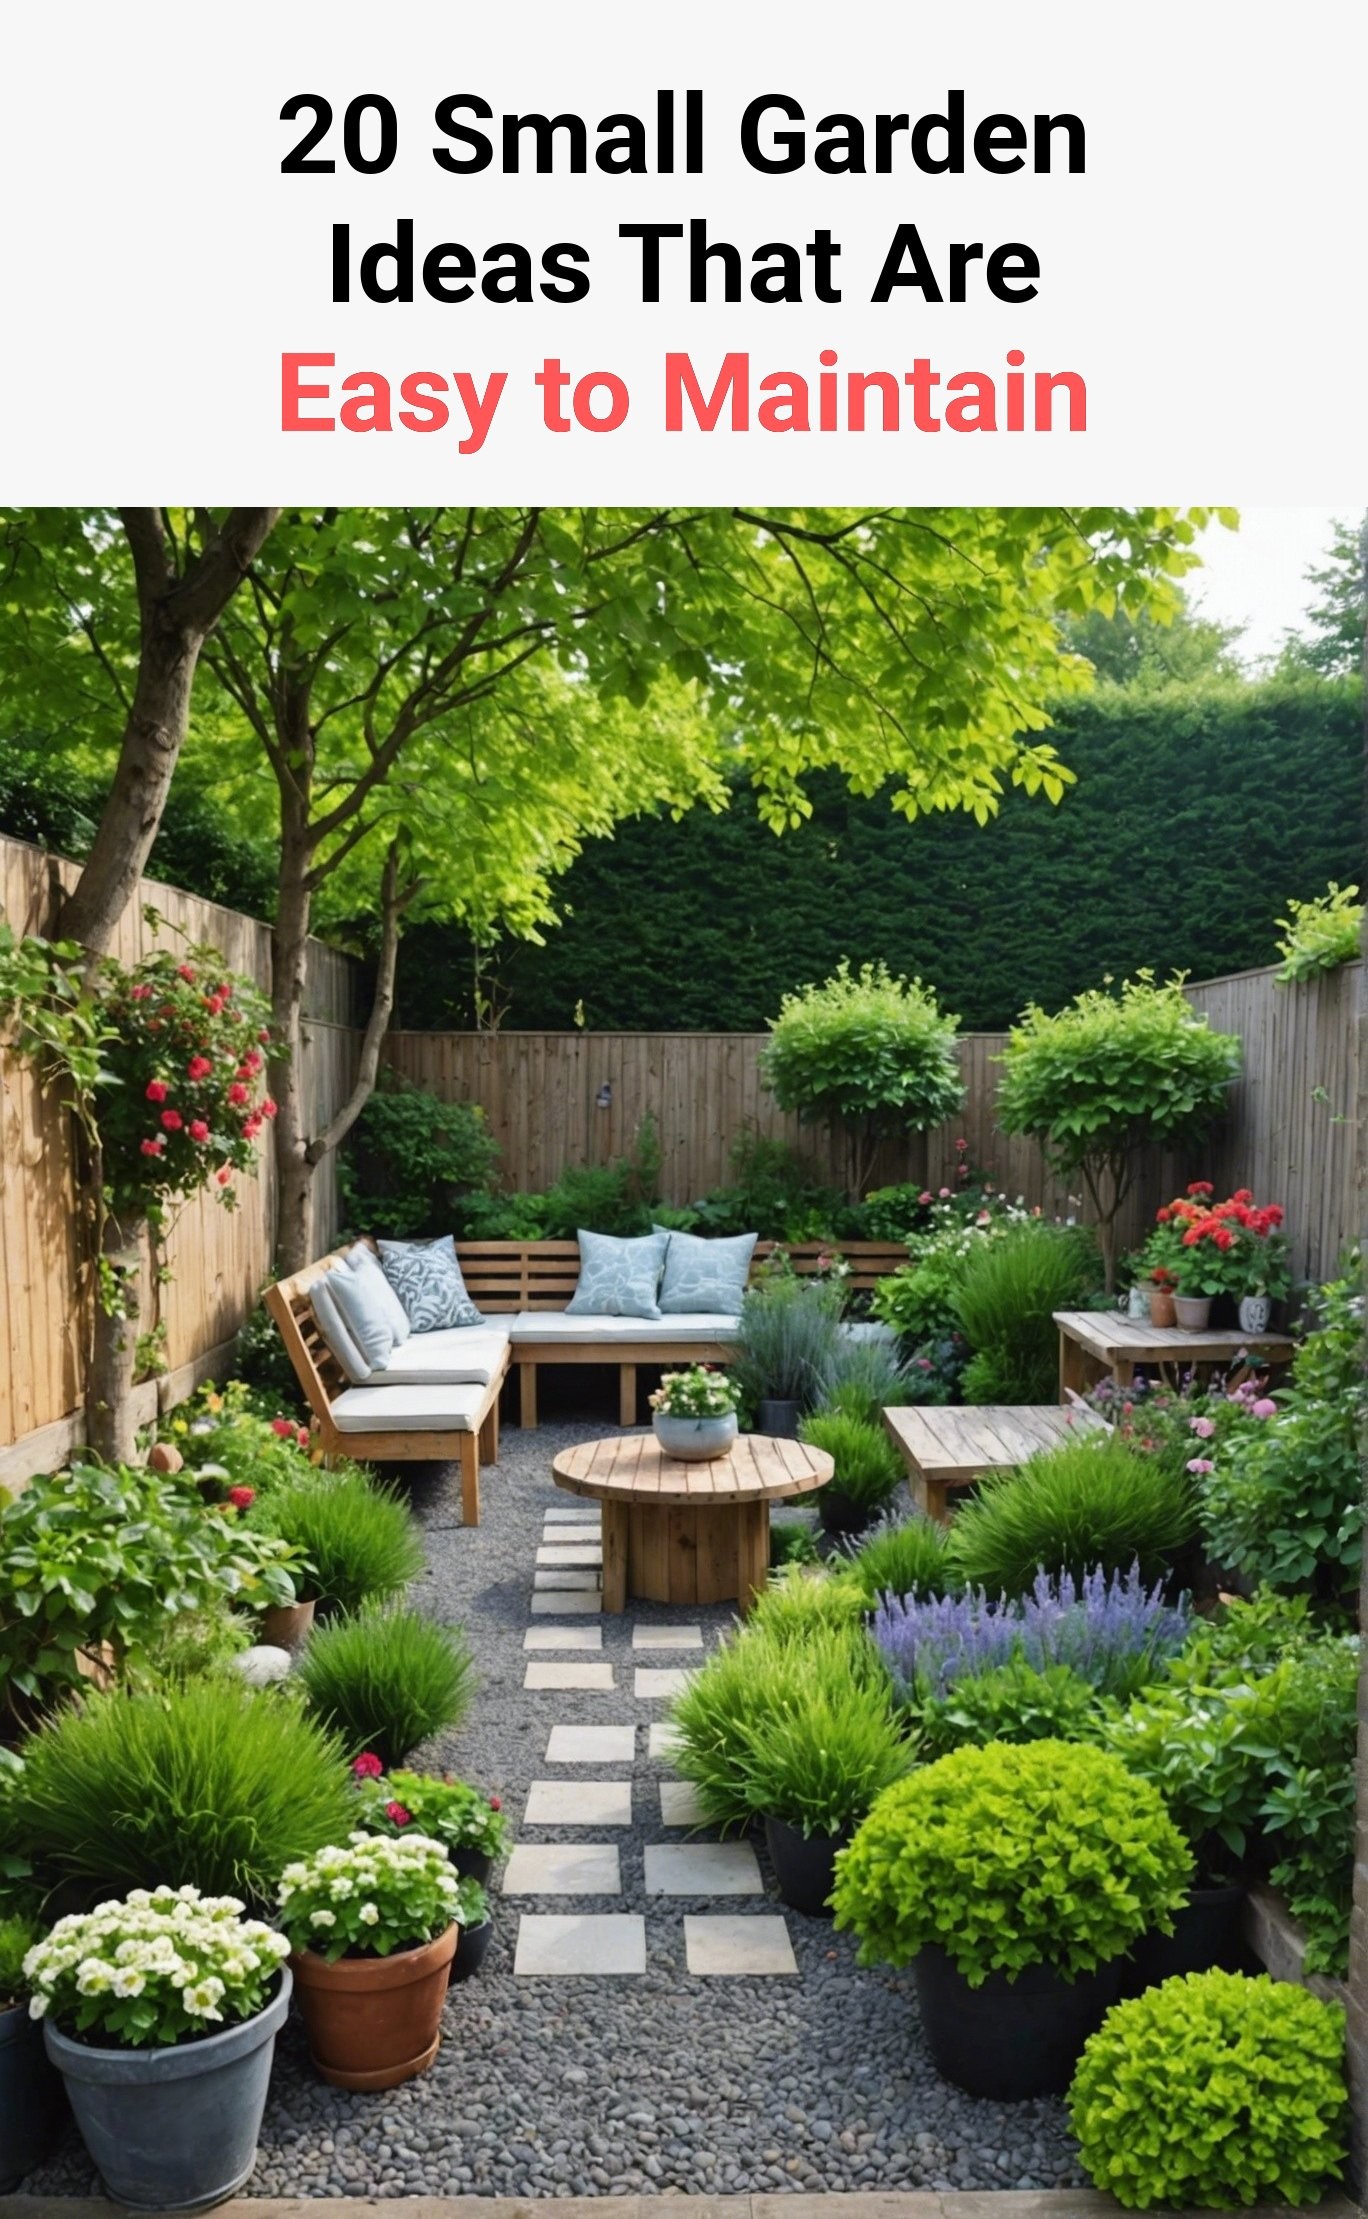 20 Small Garden Ideas That Are Easy to Maintain